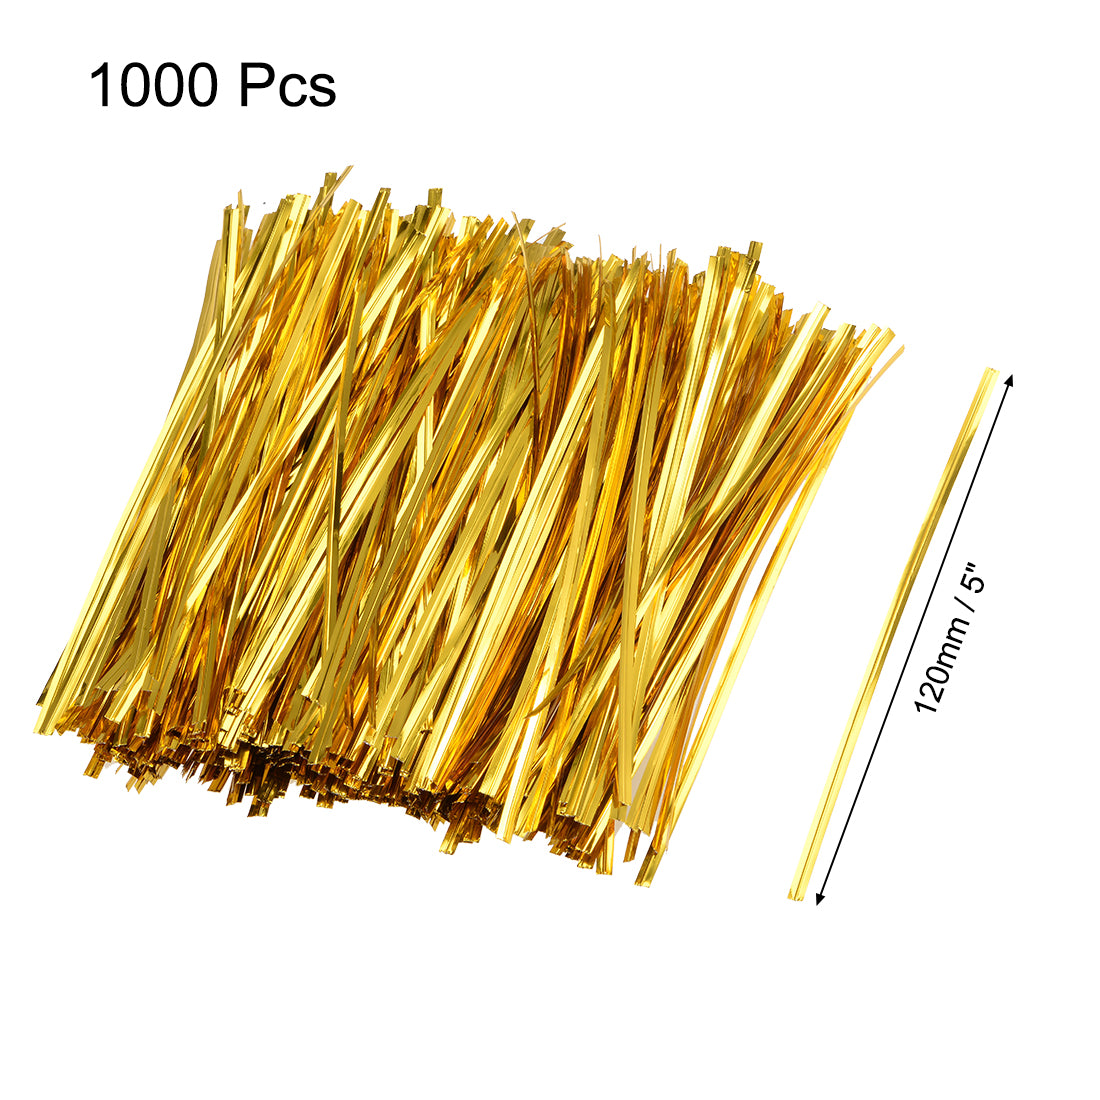 uxcell Uxcell Long Strong Twist Ties 4.7 Inches Quality Plastic Closure Tie for Tying Gift Bags Art Craft Ties Manage Cords Golden 1000pcs